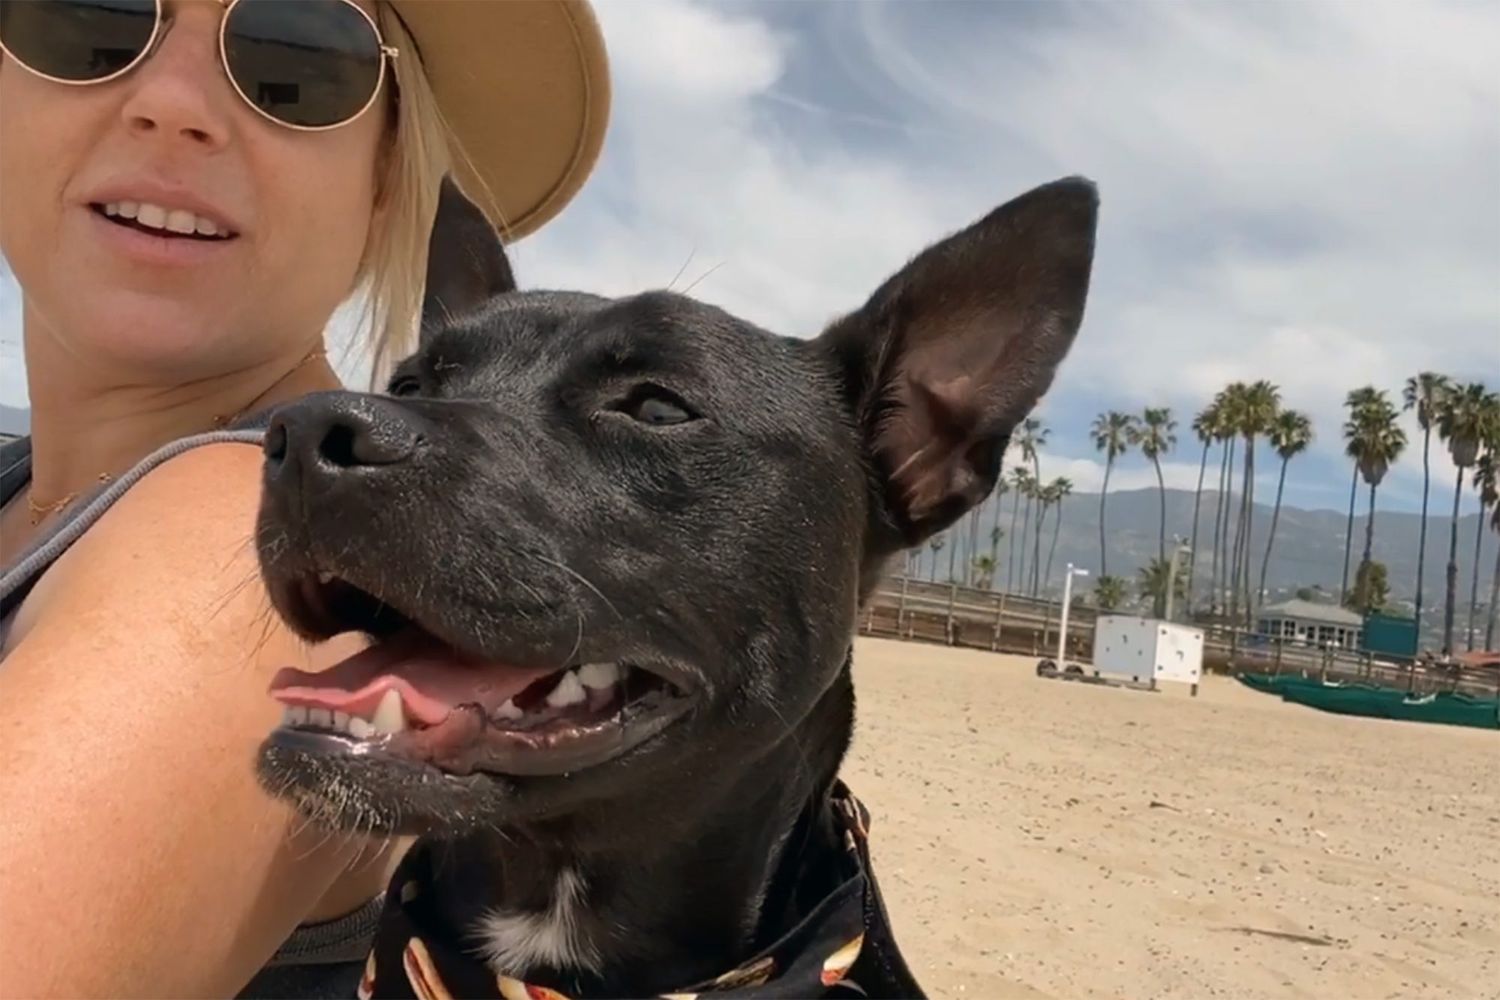 Black dog with pointy ears sits next to blonde woman on sandy beach